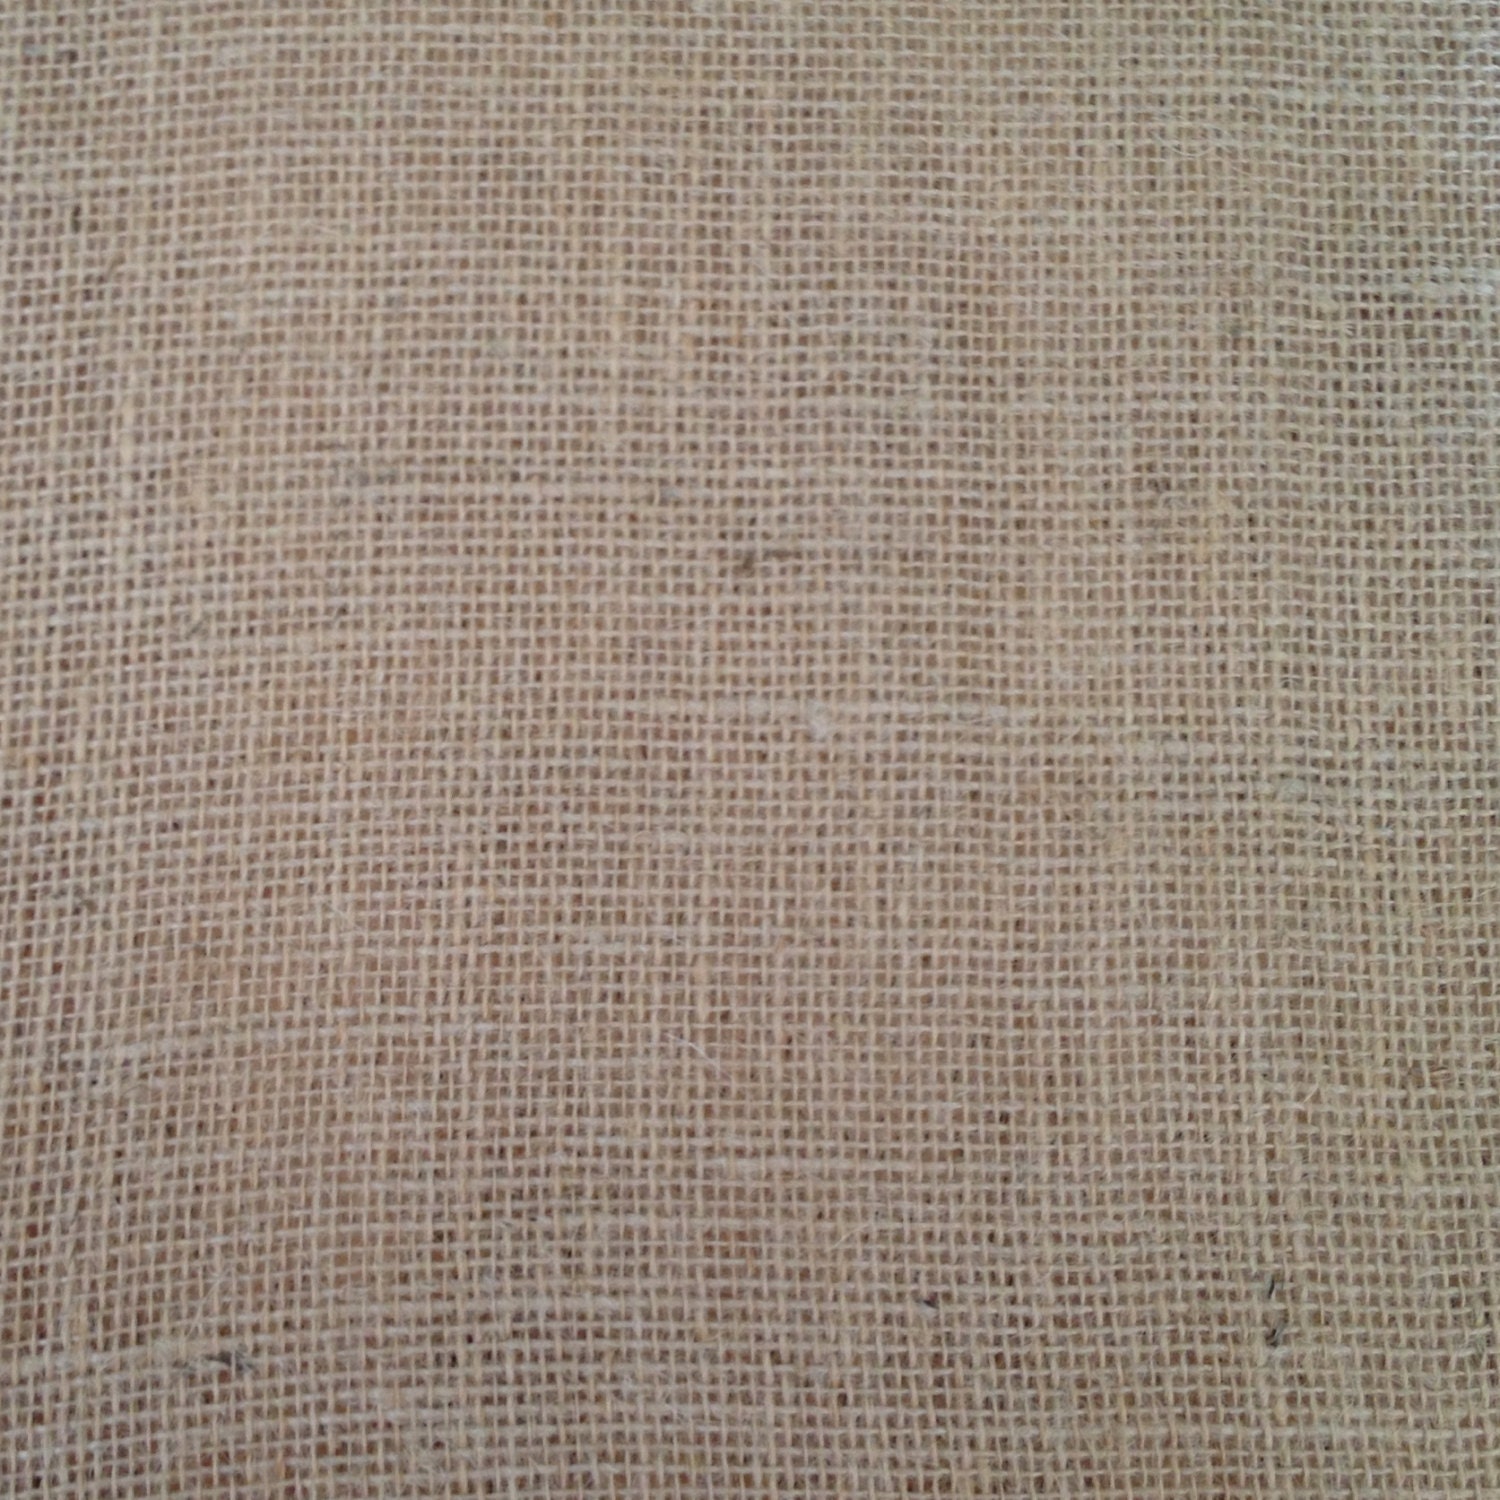 Square Burlap Overlay - 50" long x 50" wide